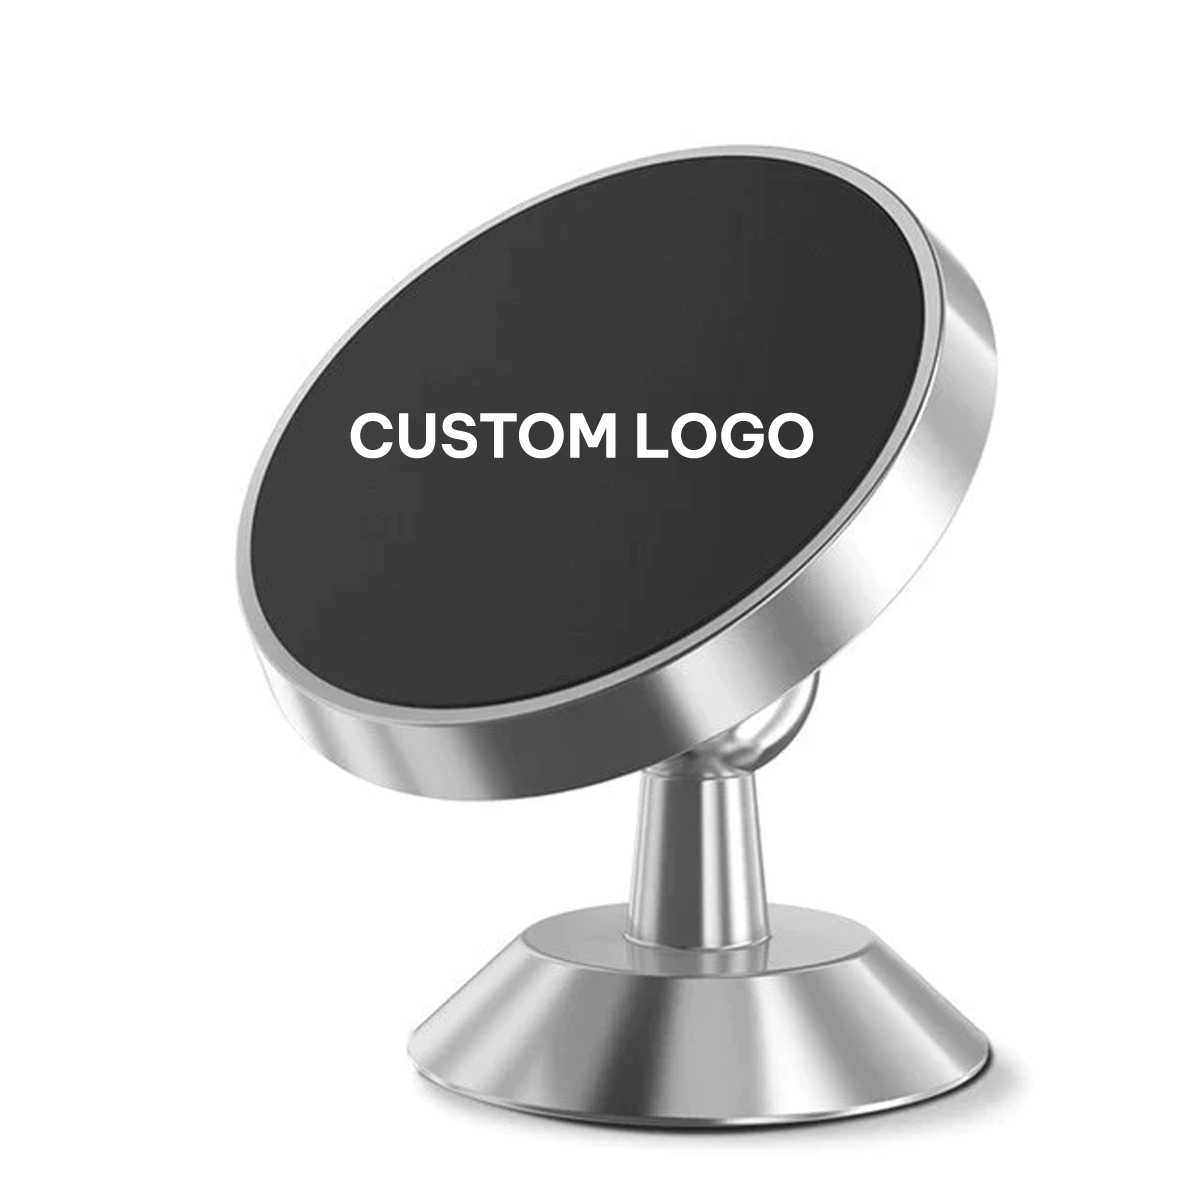 Custom Logo Magnetic Phone Mount, Super Strong Magnet with 4 Metal Plate, 360° Rotation, Set of 2